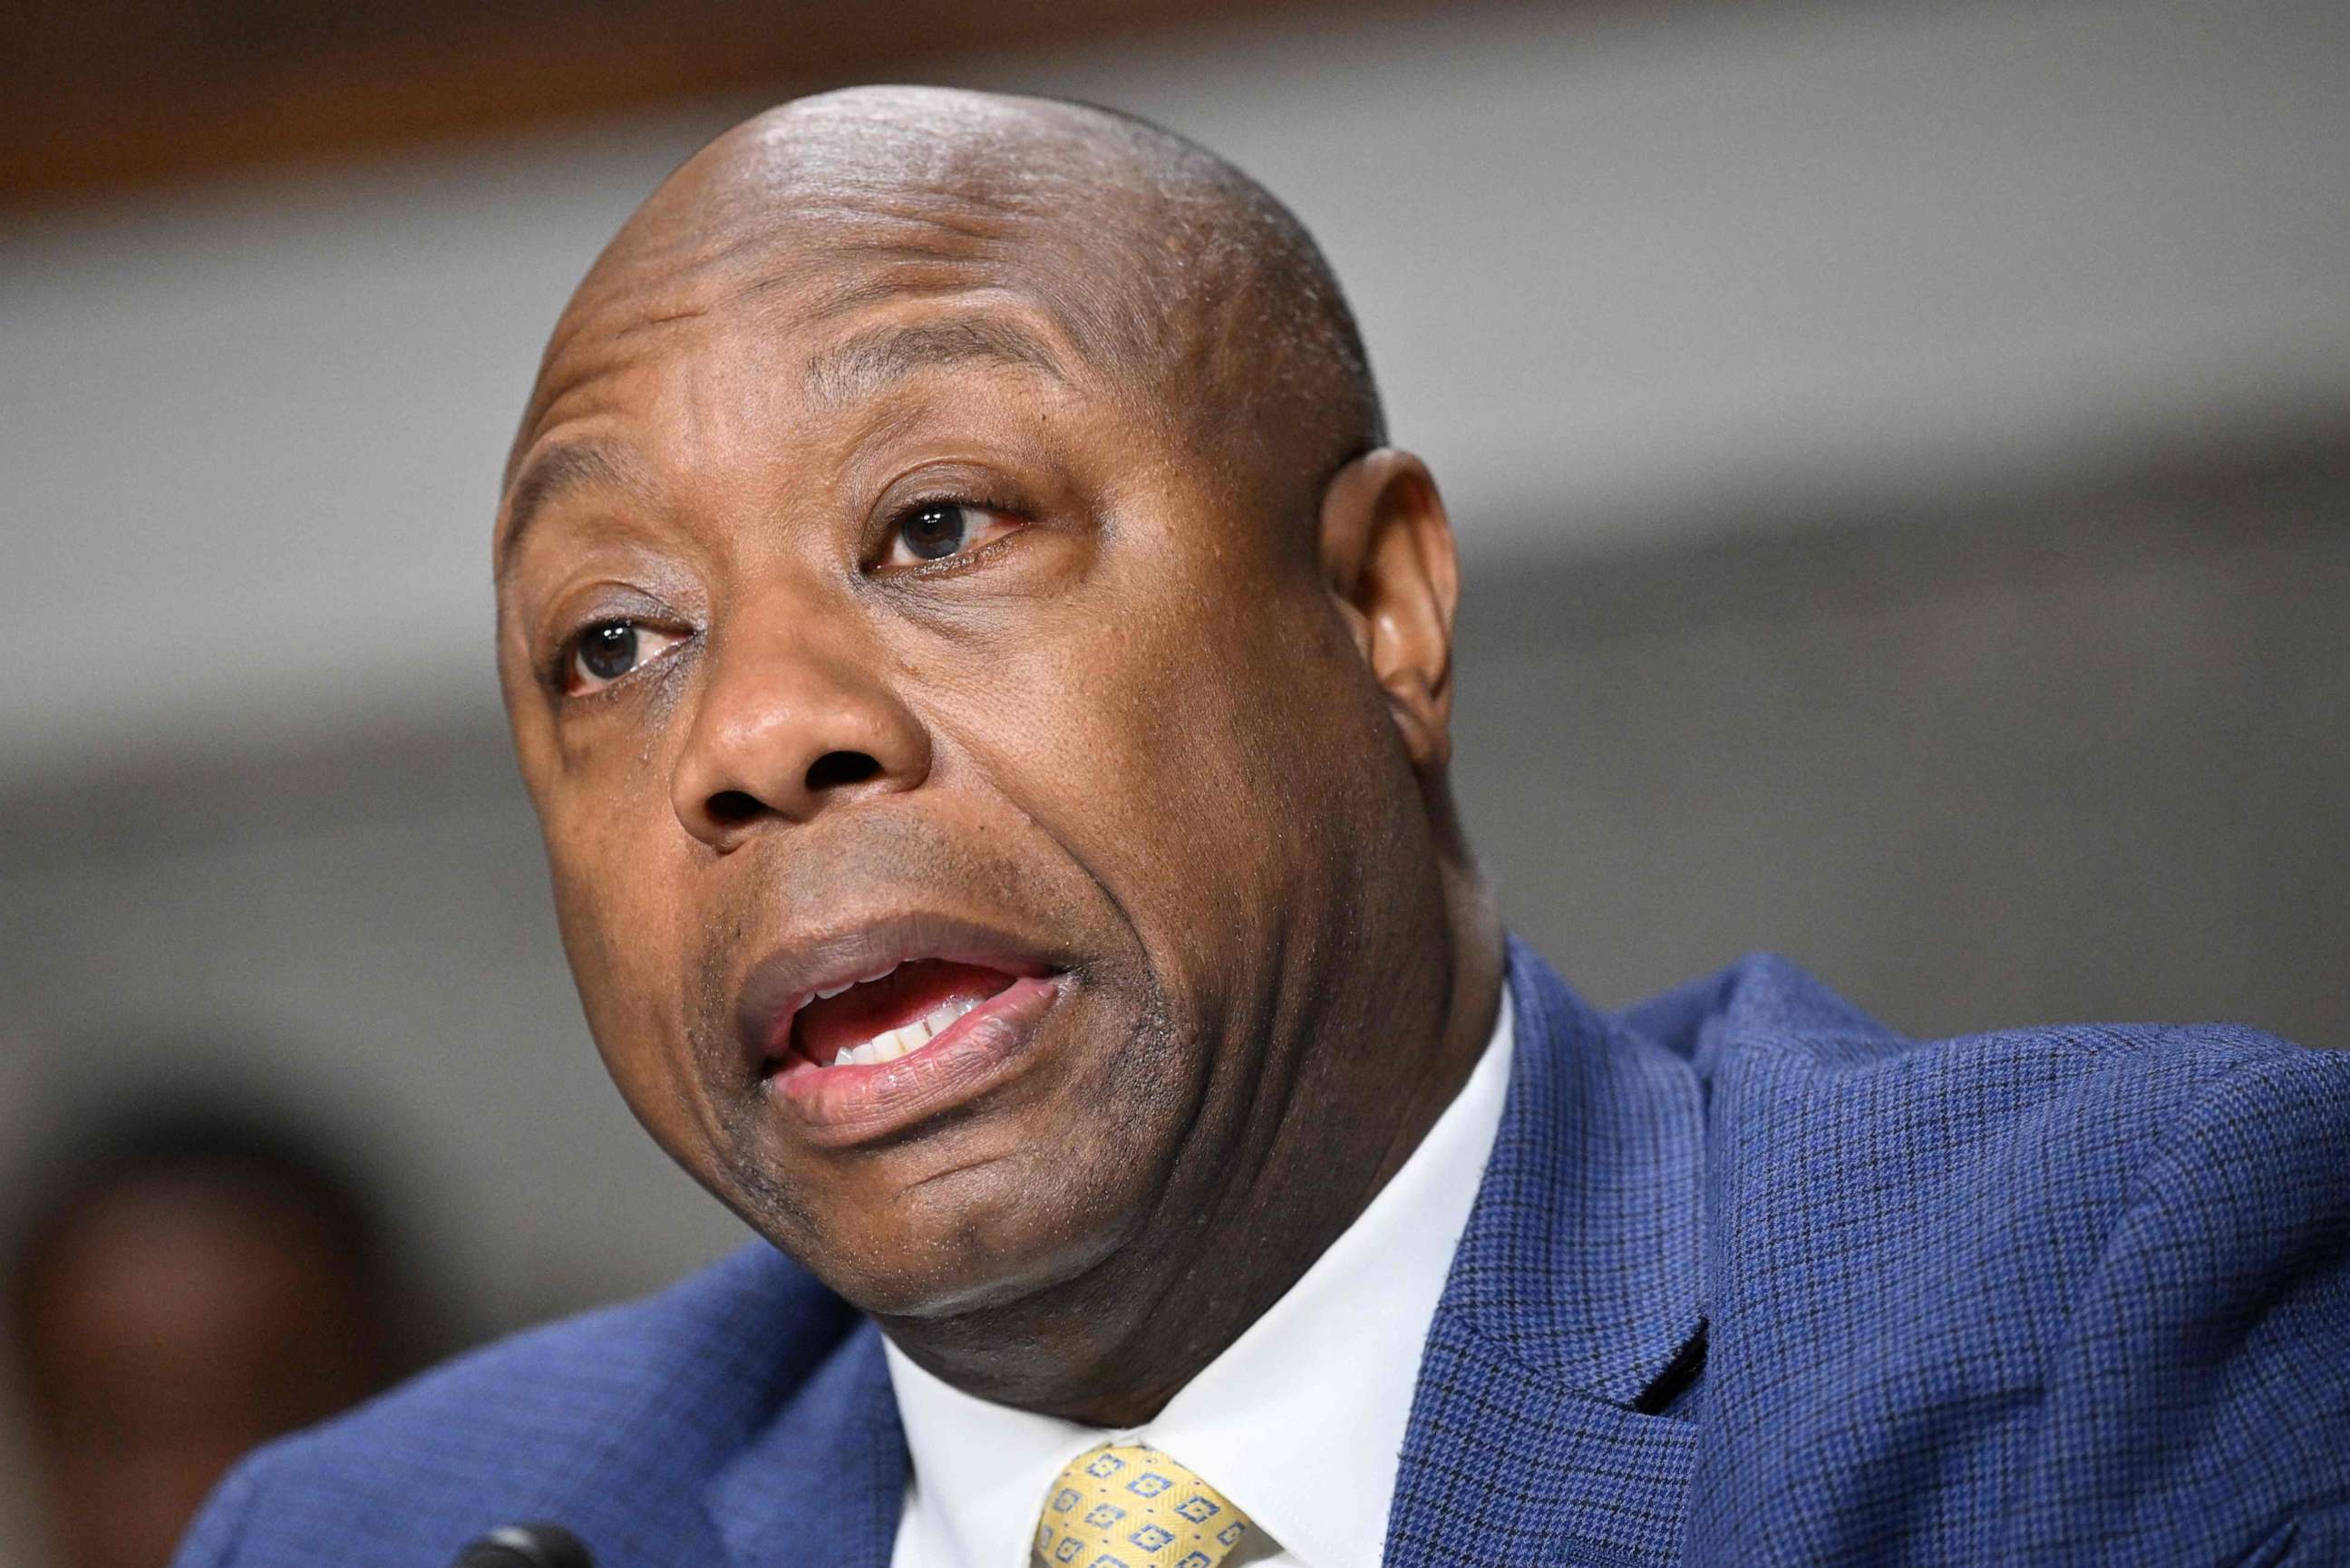 PHOTO: Senator Tim Scott (R-SC) speaks during the Senate Banking, Housing, and Urban Affairs Committee hearing on the failures of Silicon Valley Bank and Signature Bank, on Capitol Hill in Washington, DC, on May 16, 2023.